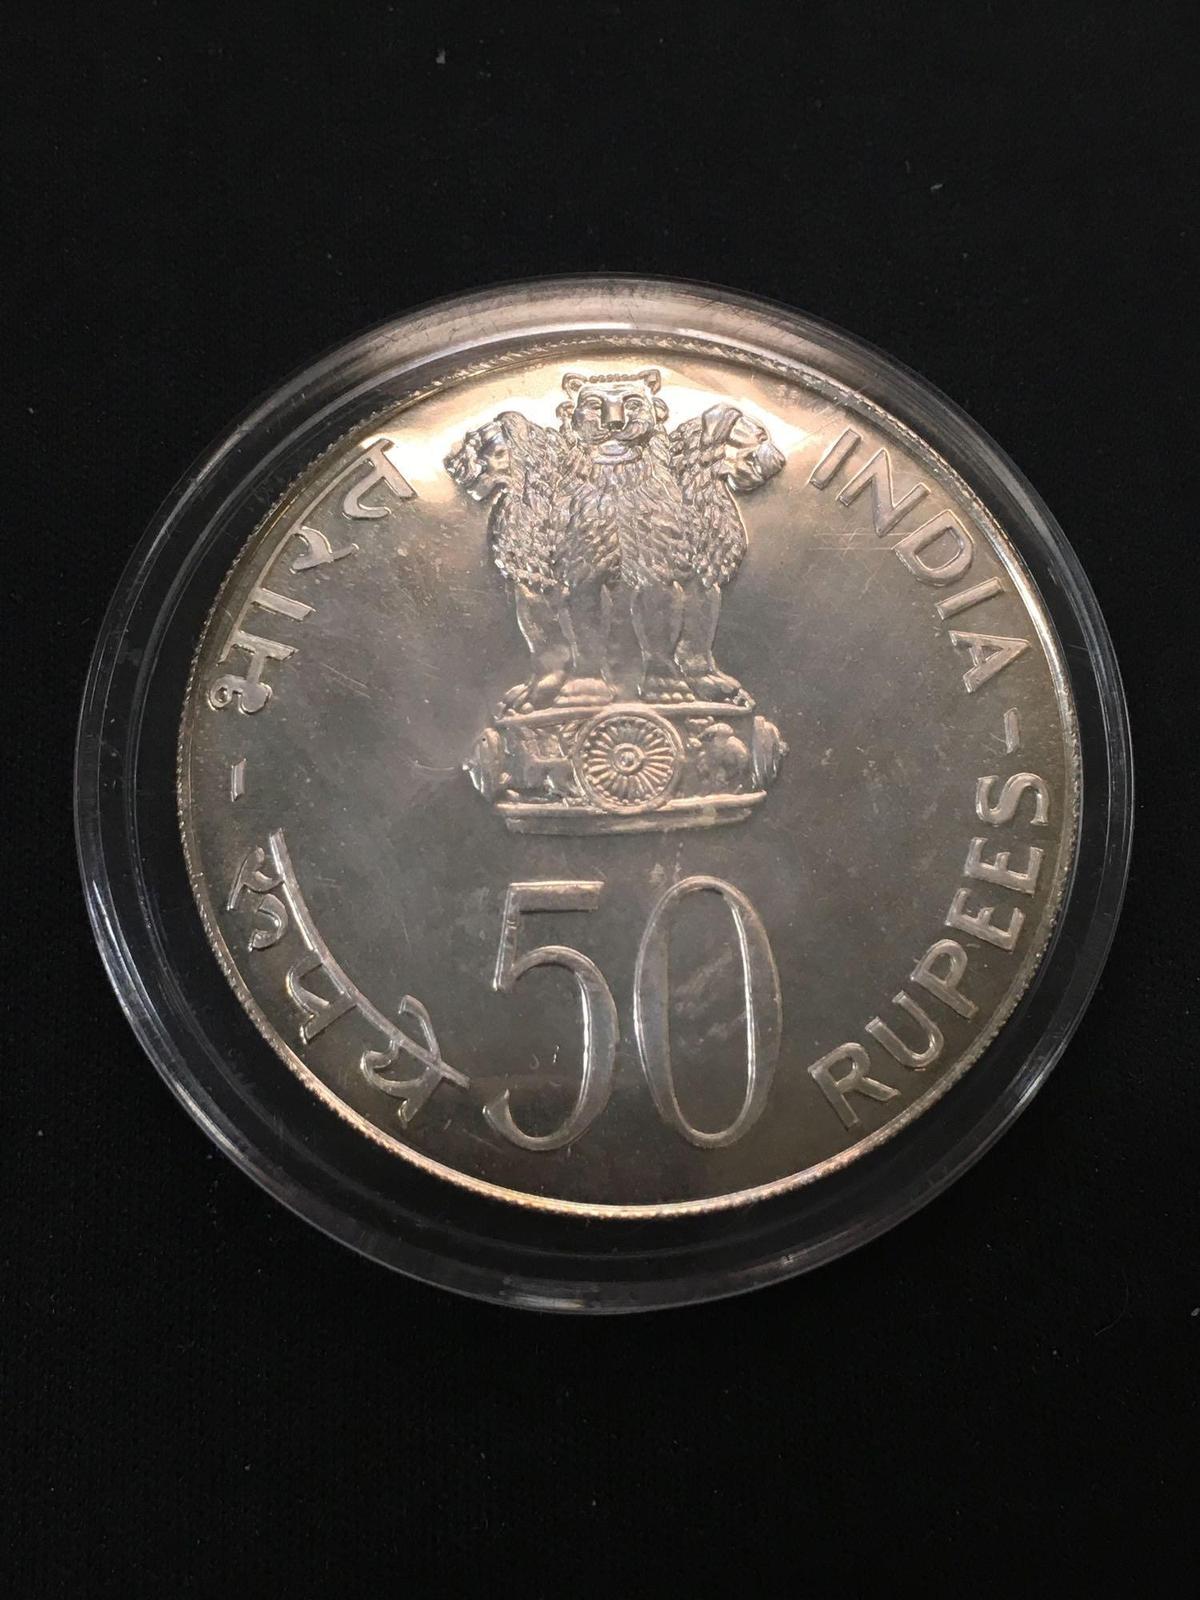 RARE 50% Silver 50 Rupees India "Planned Families: Food For All" Coin